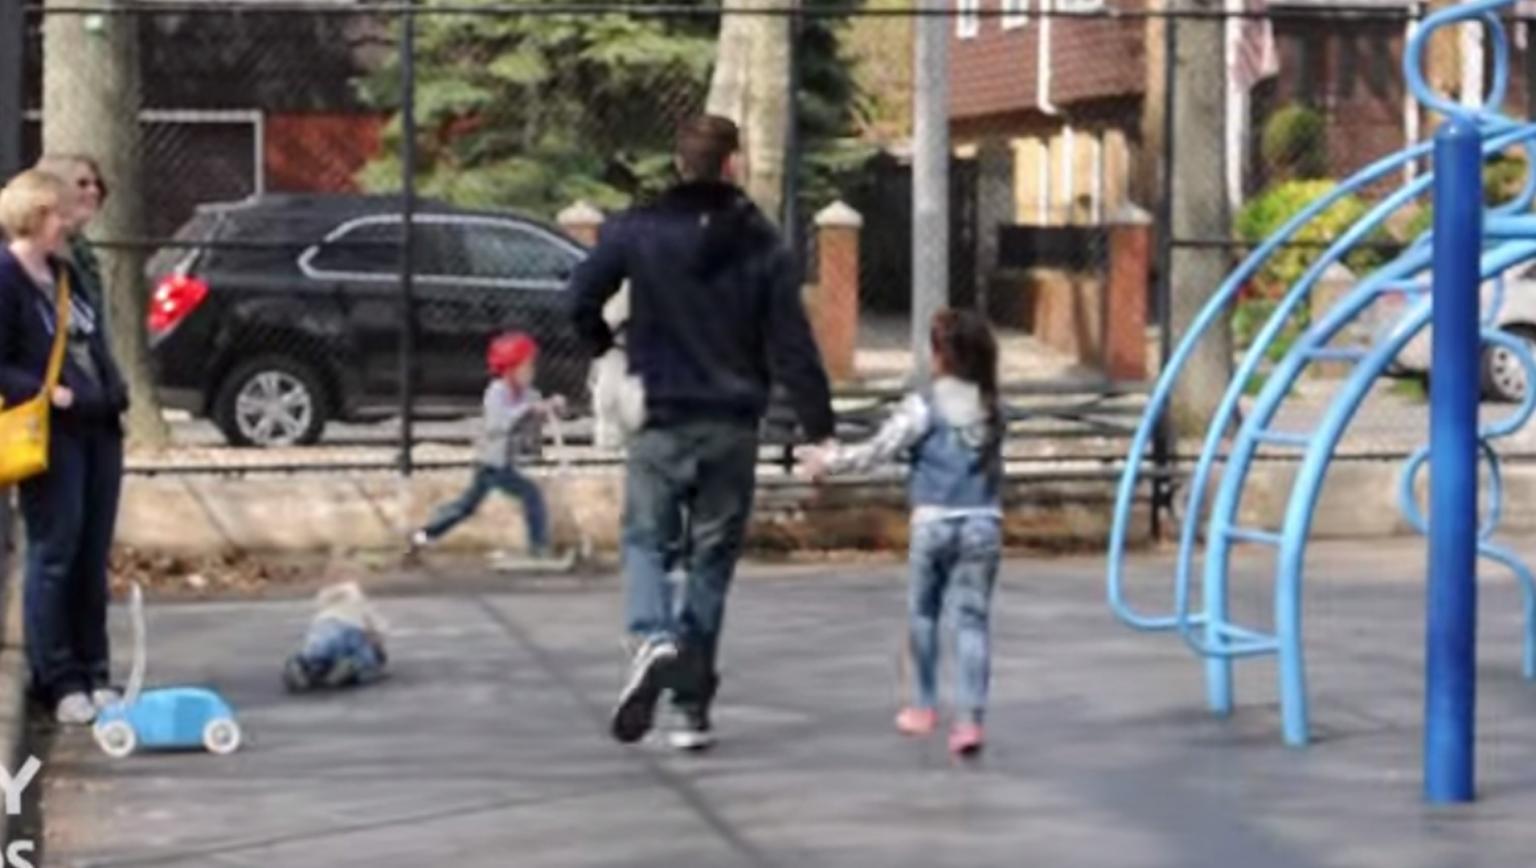 Chilling Child Abduction Social Experiment Goes Viral. Star 104.5 FM